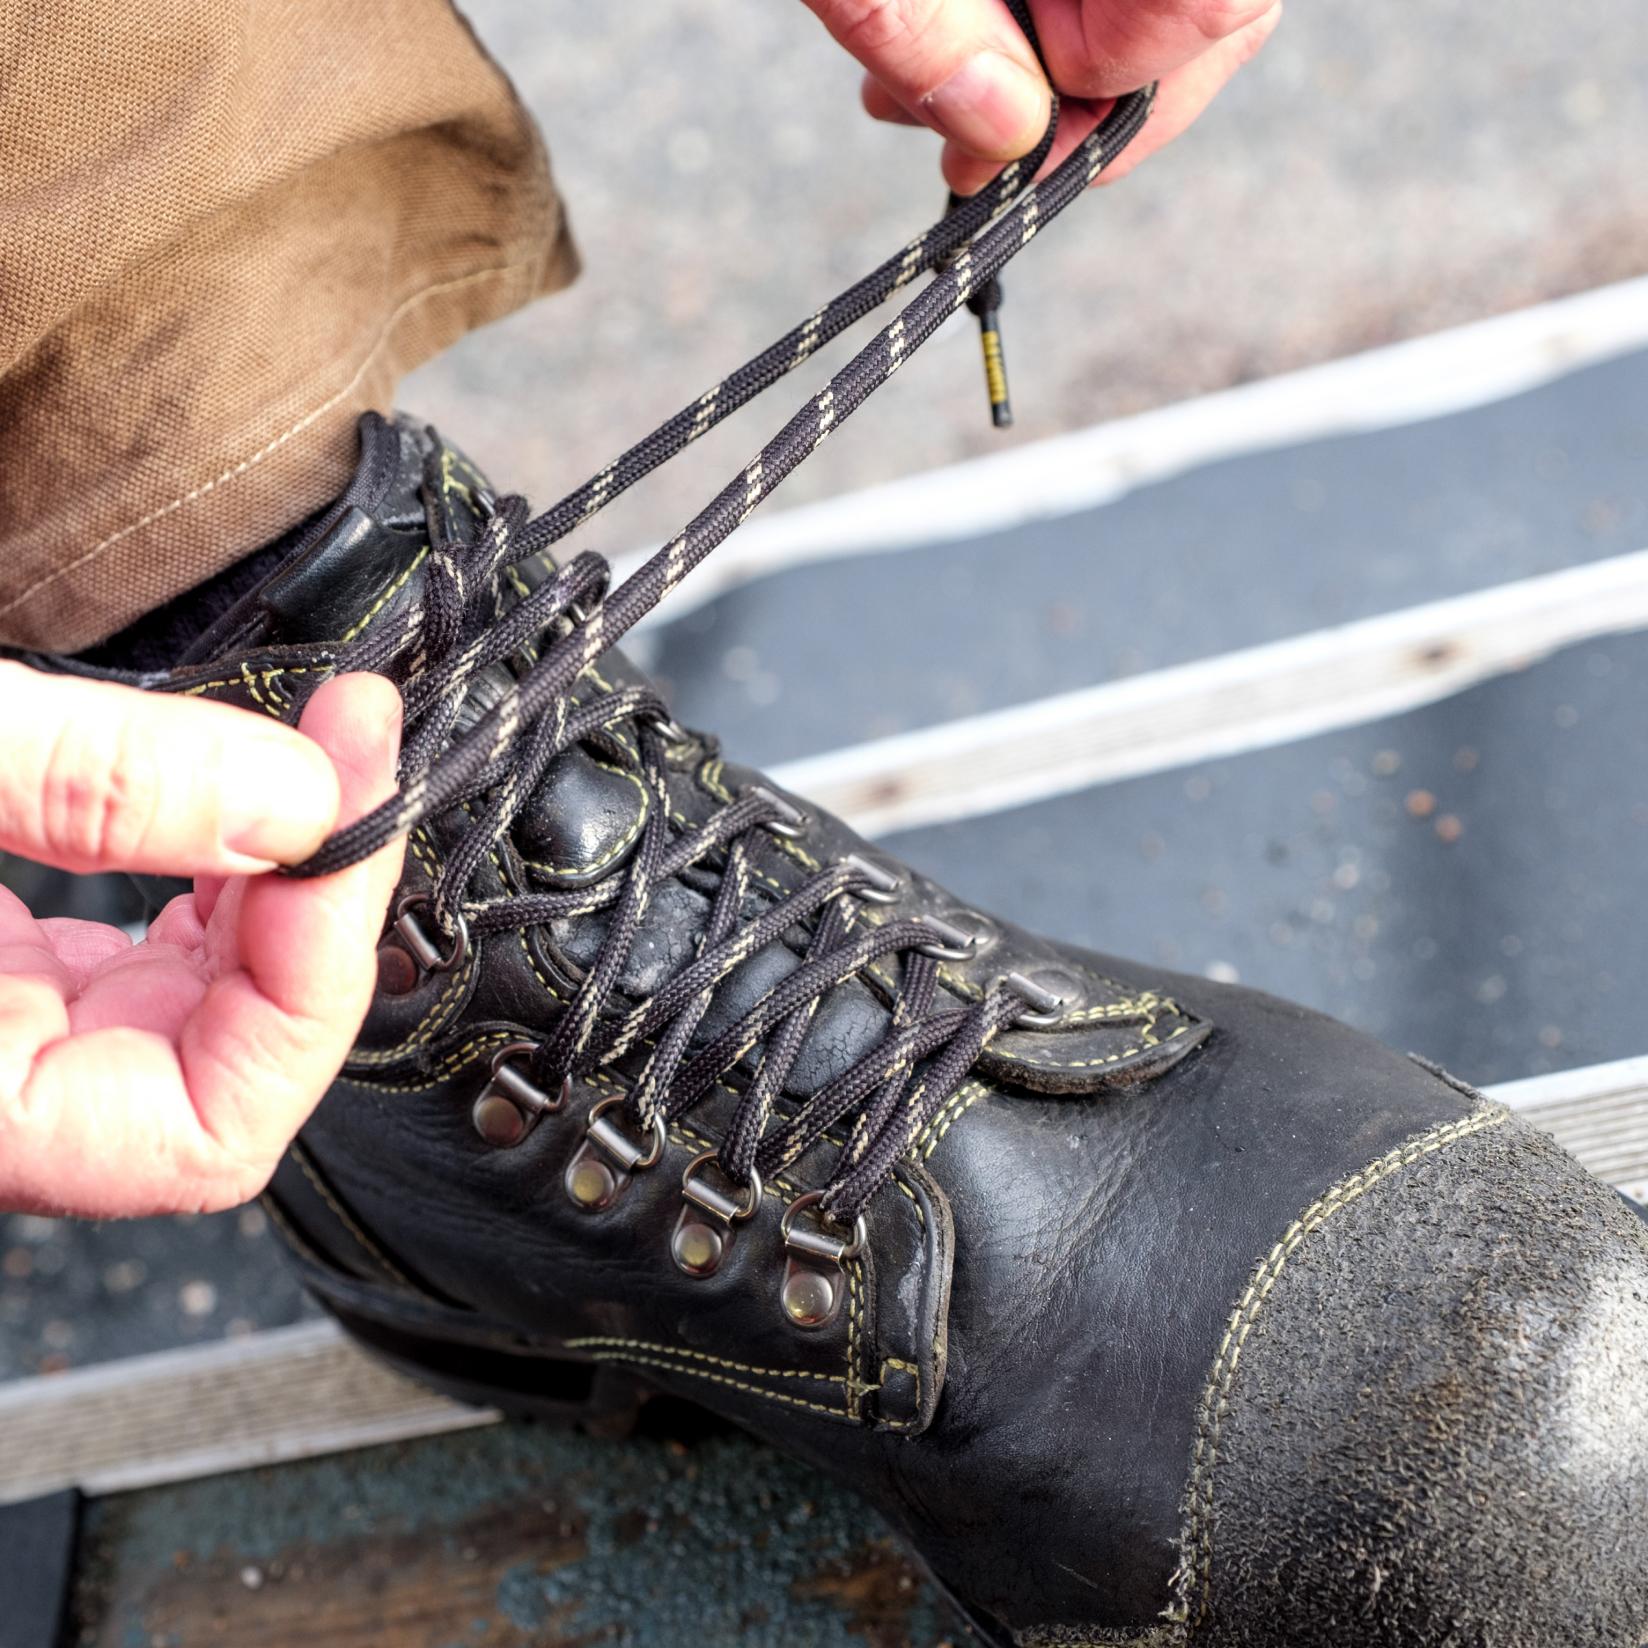 Up close shot of a person with their work boot on a bench, tying the laces of their boot.